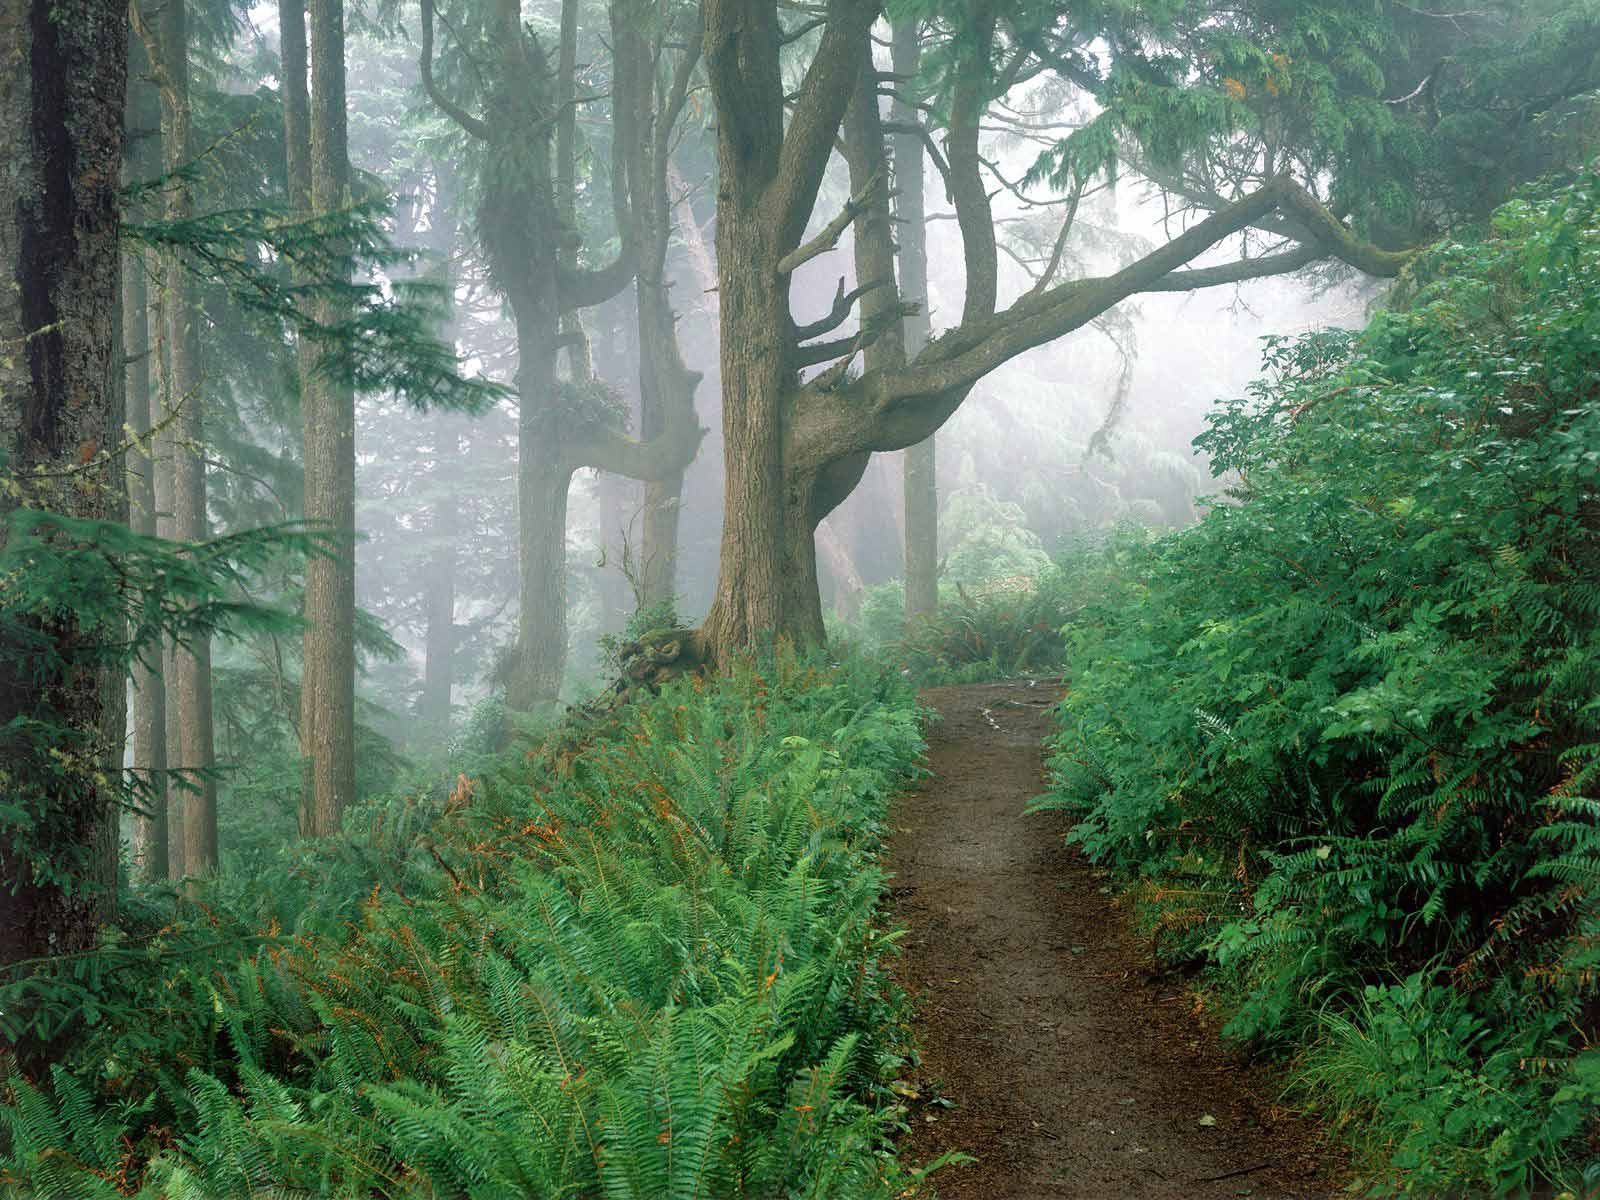 branches, nature, trees, fern, forest, fog, branch, path, trail